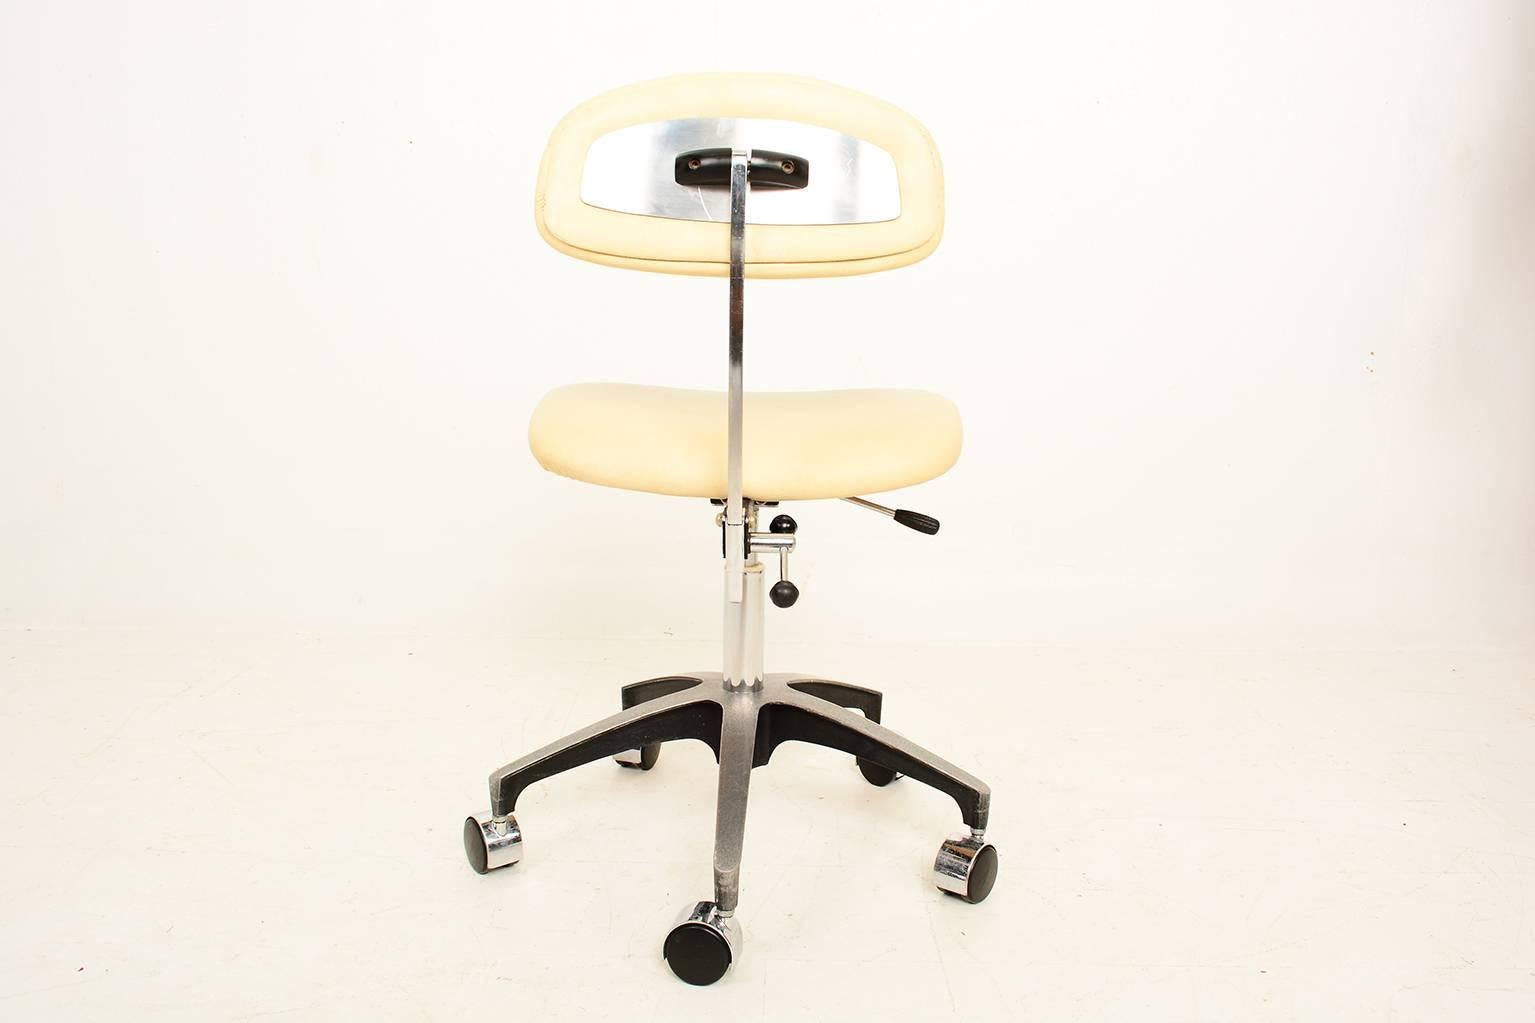 For your consideration a vintage office chair made of aluminum and upholstered in original off white Naugahyde (faux leather texture).

The chair requires new upholstery. Price includes the upholstery label, customer to provide fabric. 

Five